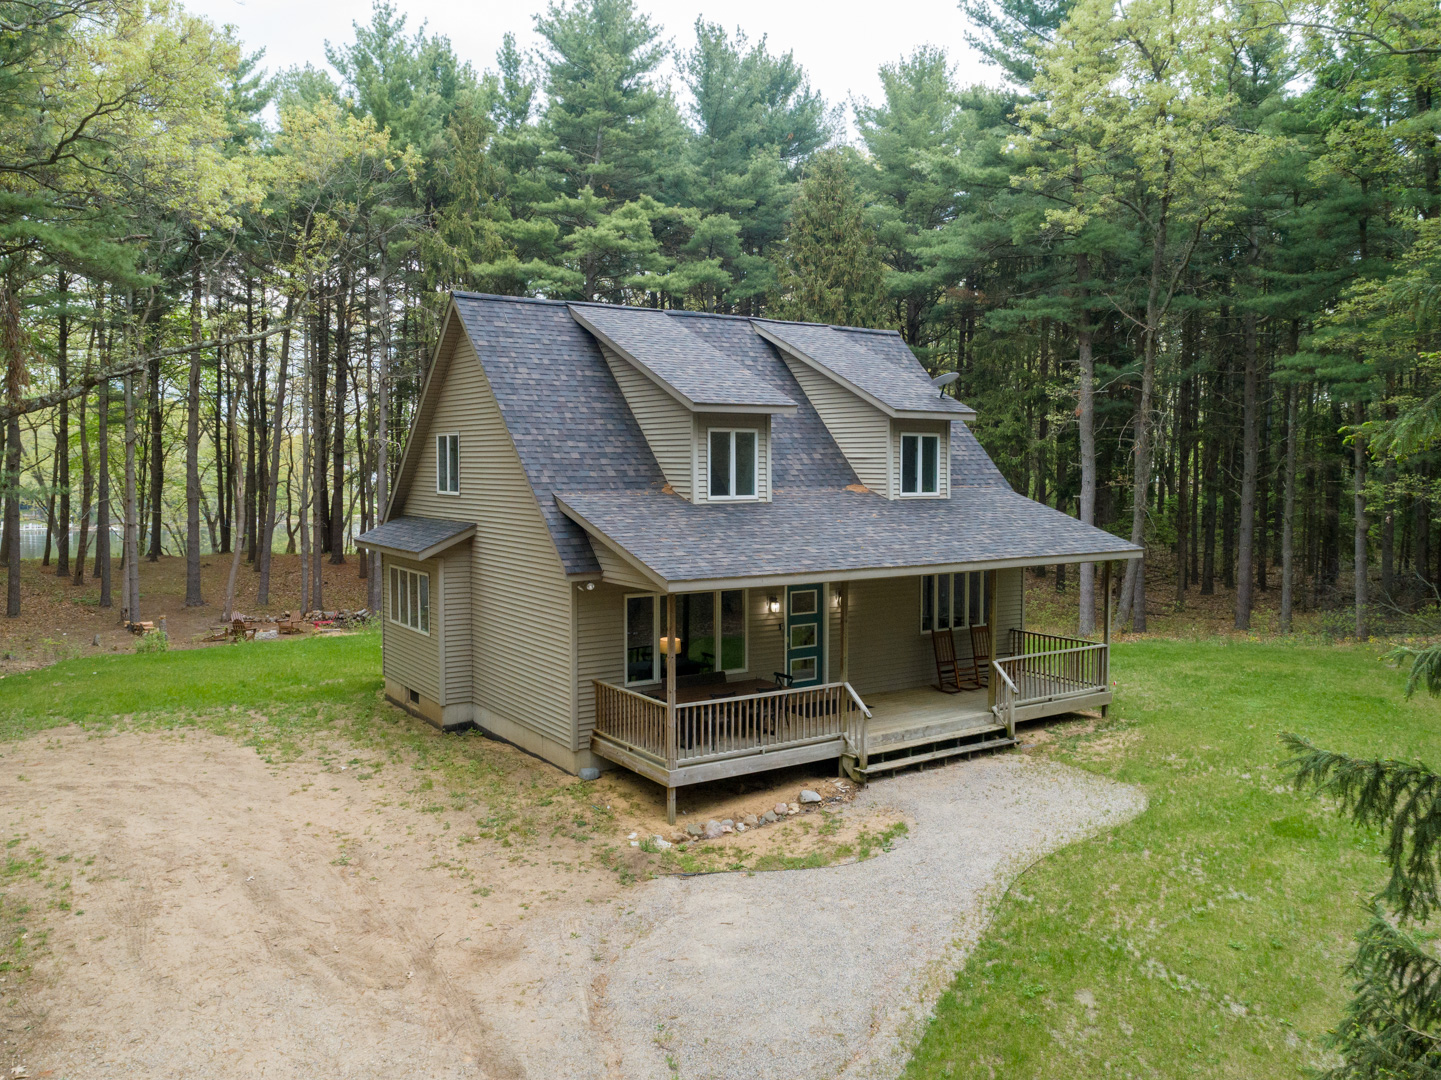 Birch Lodge is situated in Saugatuck on over two and a half acres of peaceful wooded privacy.